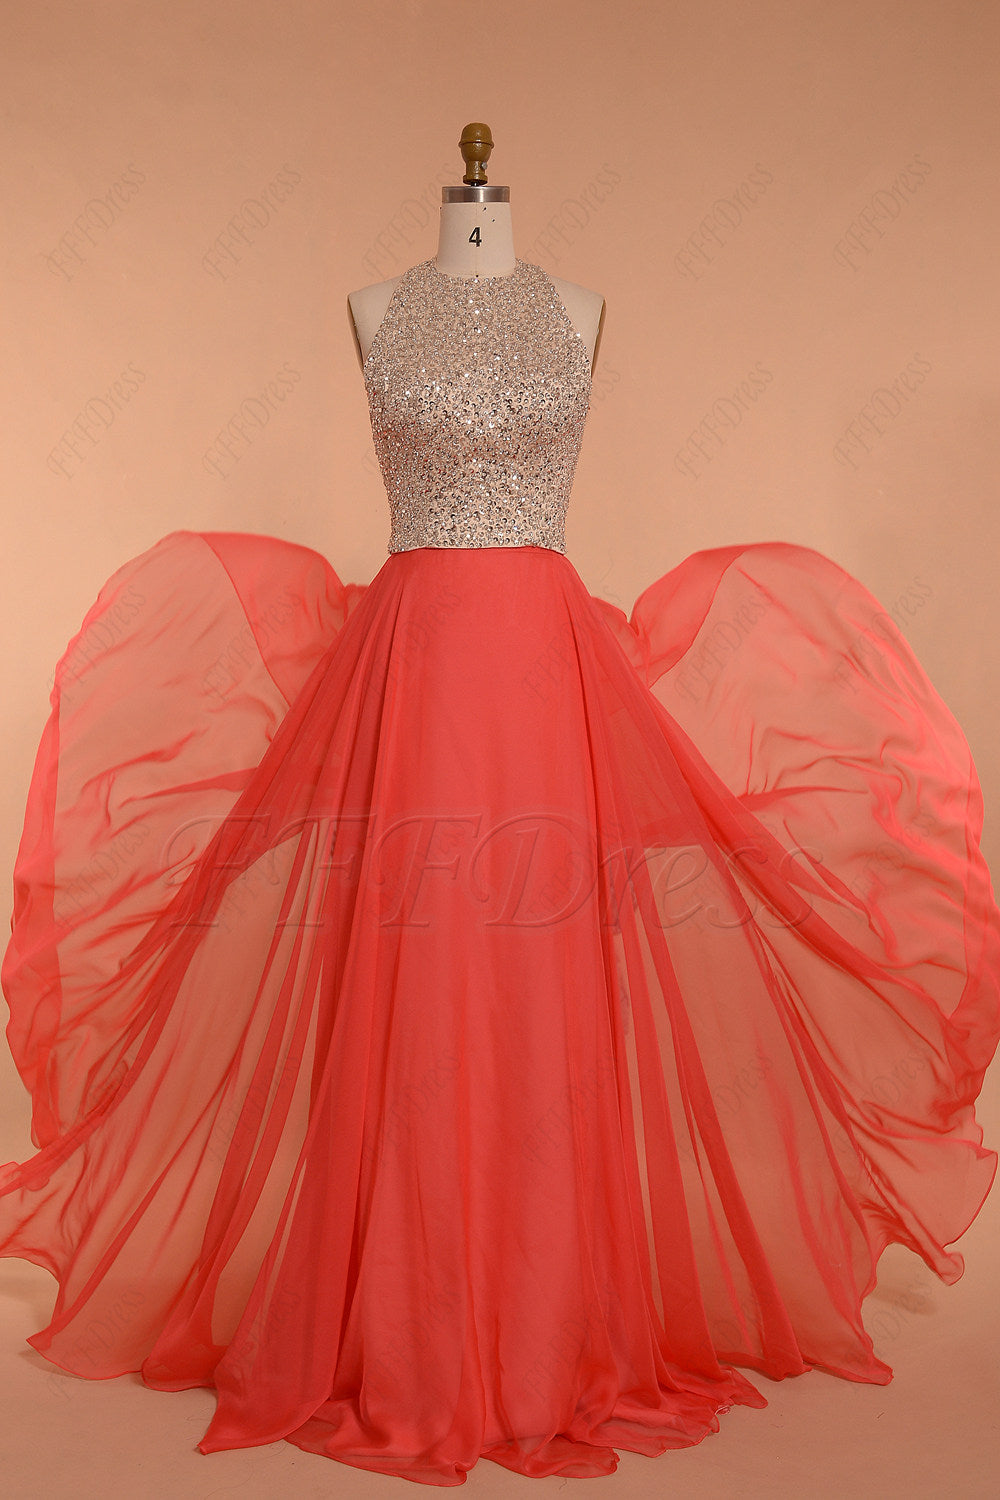 Halter Beaded Coral Prom Dresses long